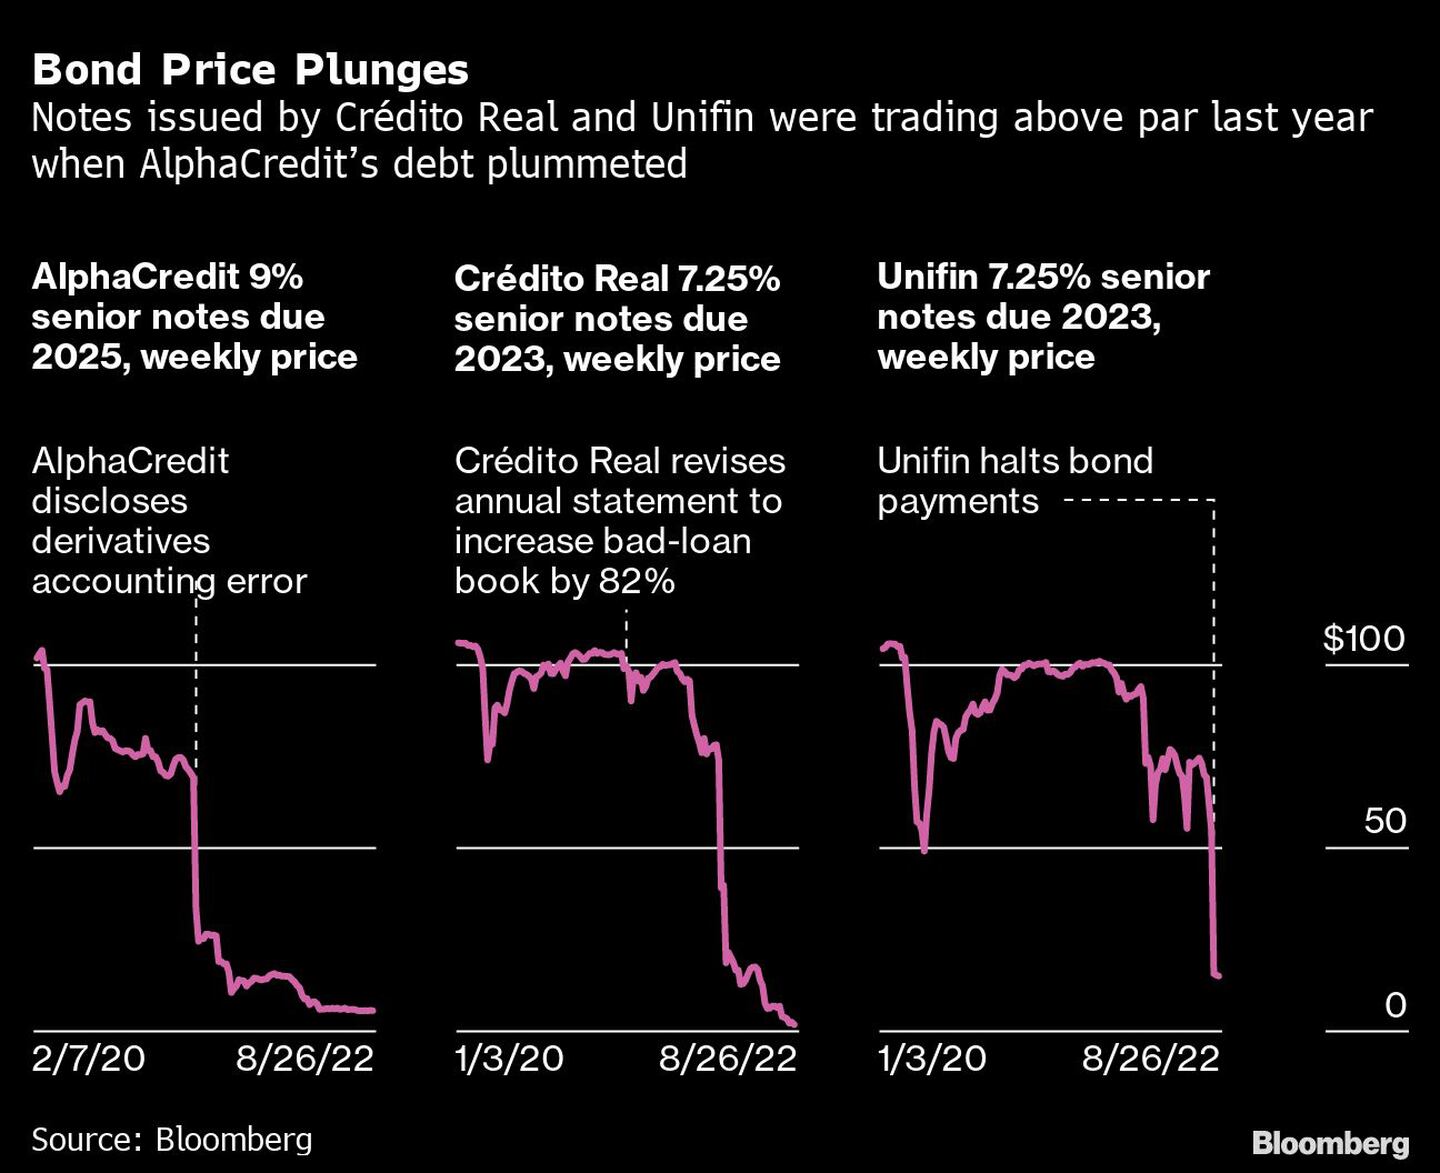 Bond Price Plunges | Notes issued by Crédito Real and Unifin were trading above par last year when AlphaCredits debt plummeteddfd